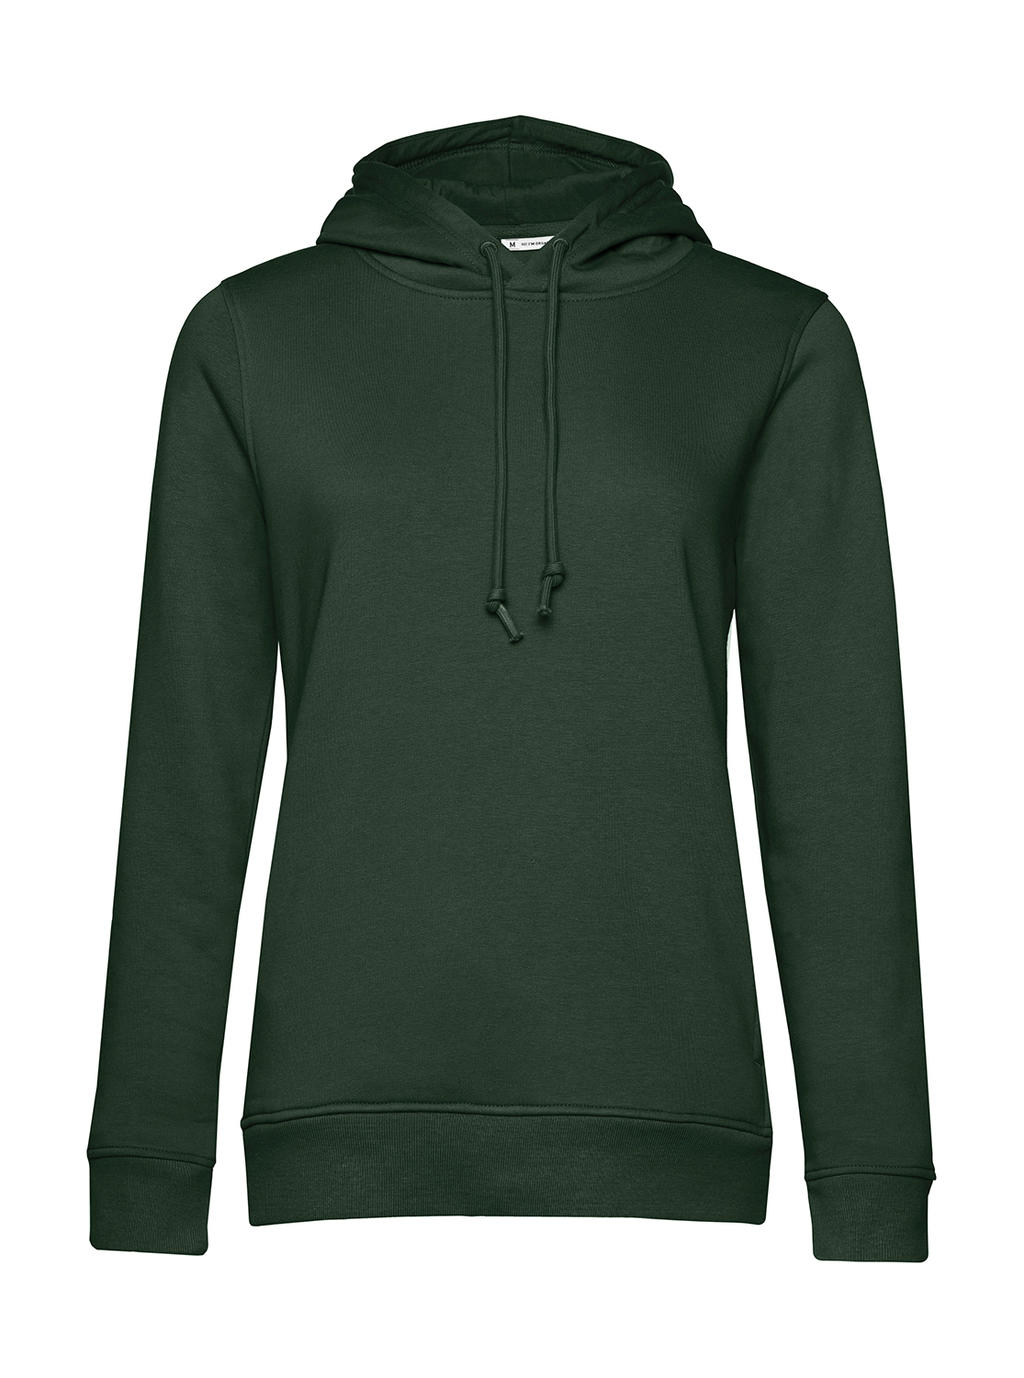  Organic Inspire Hooded /women_? in Farbe Forest Green